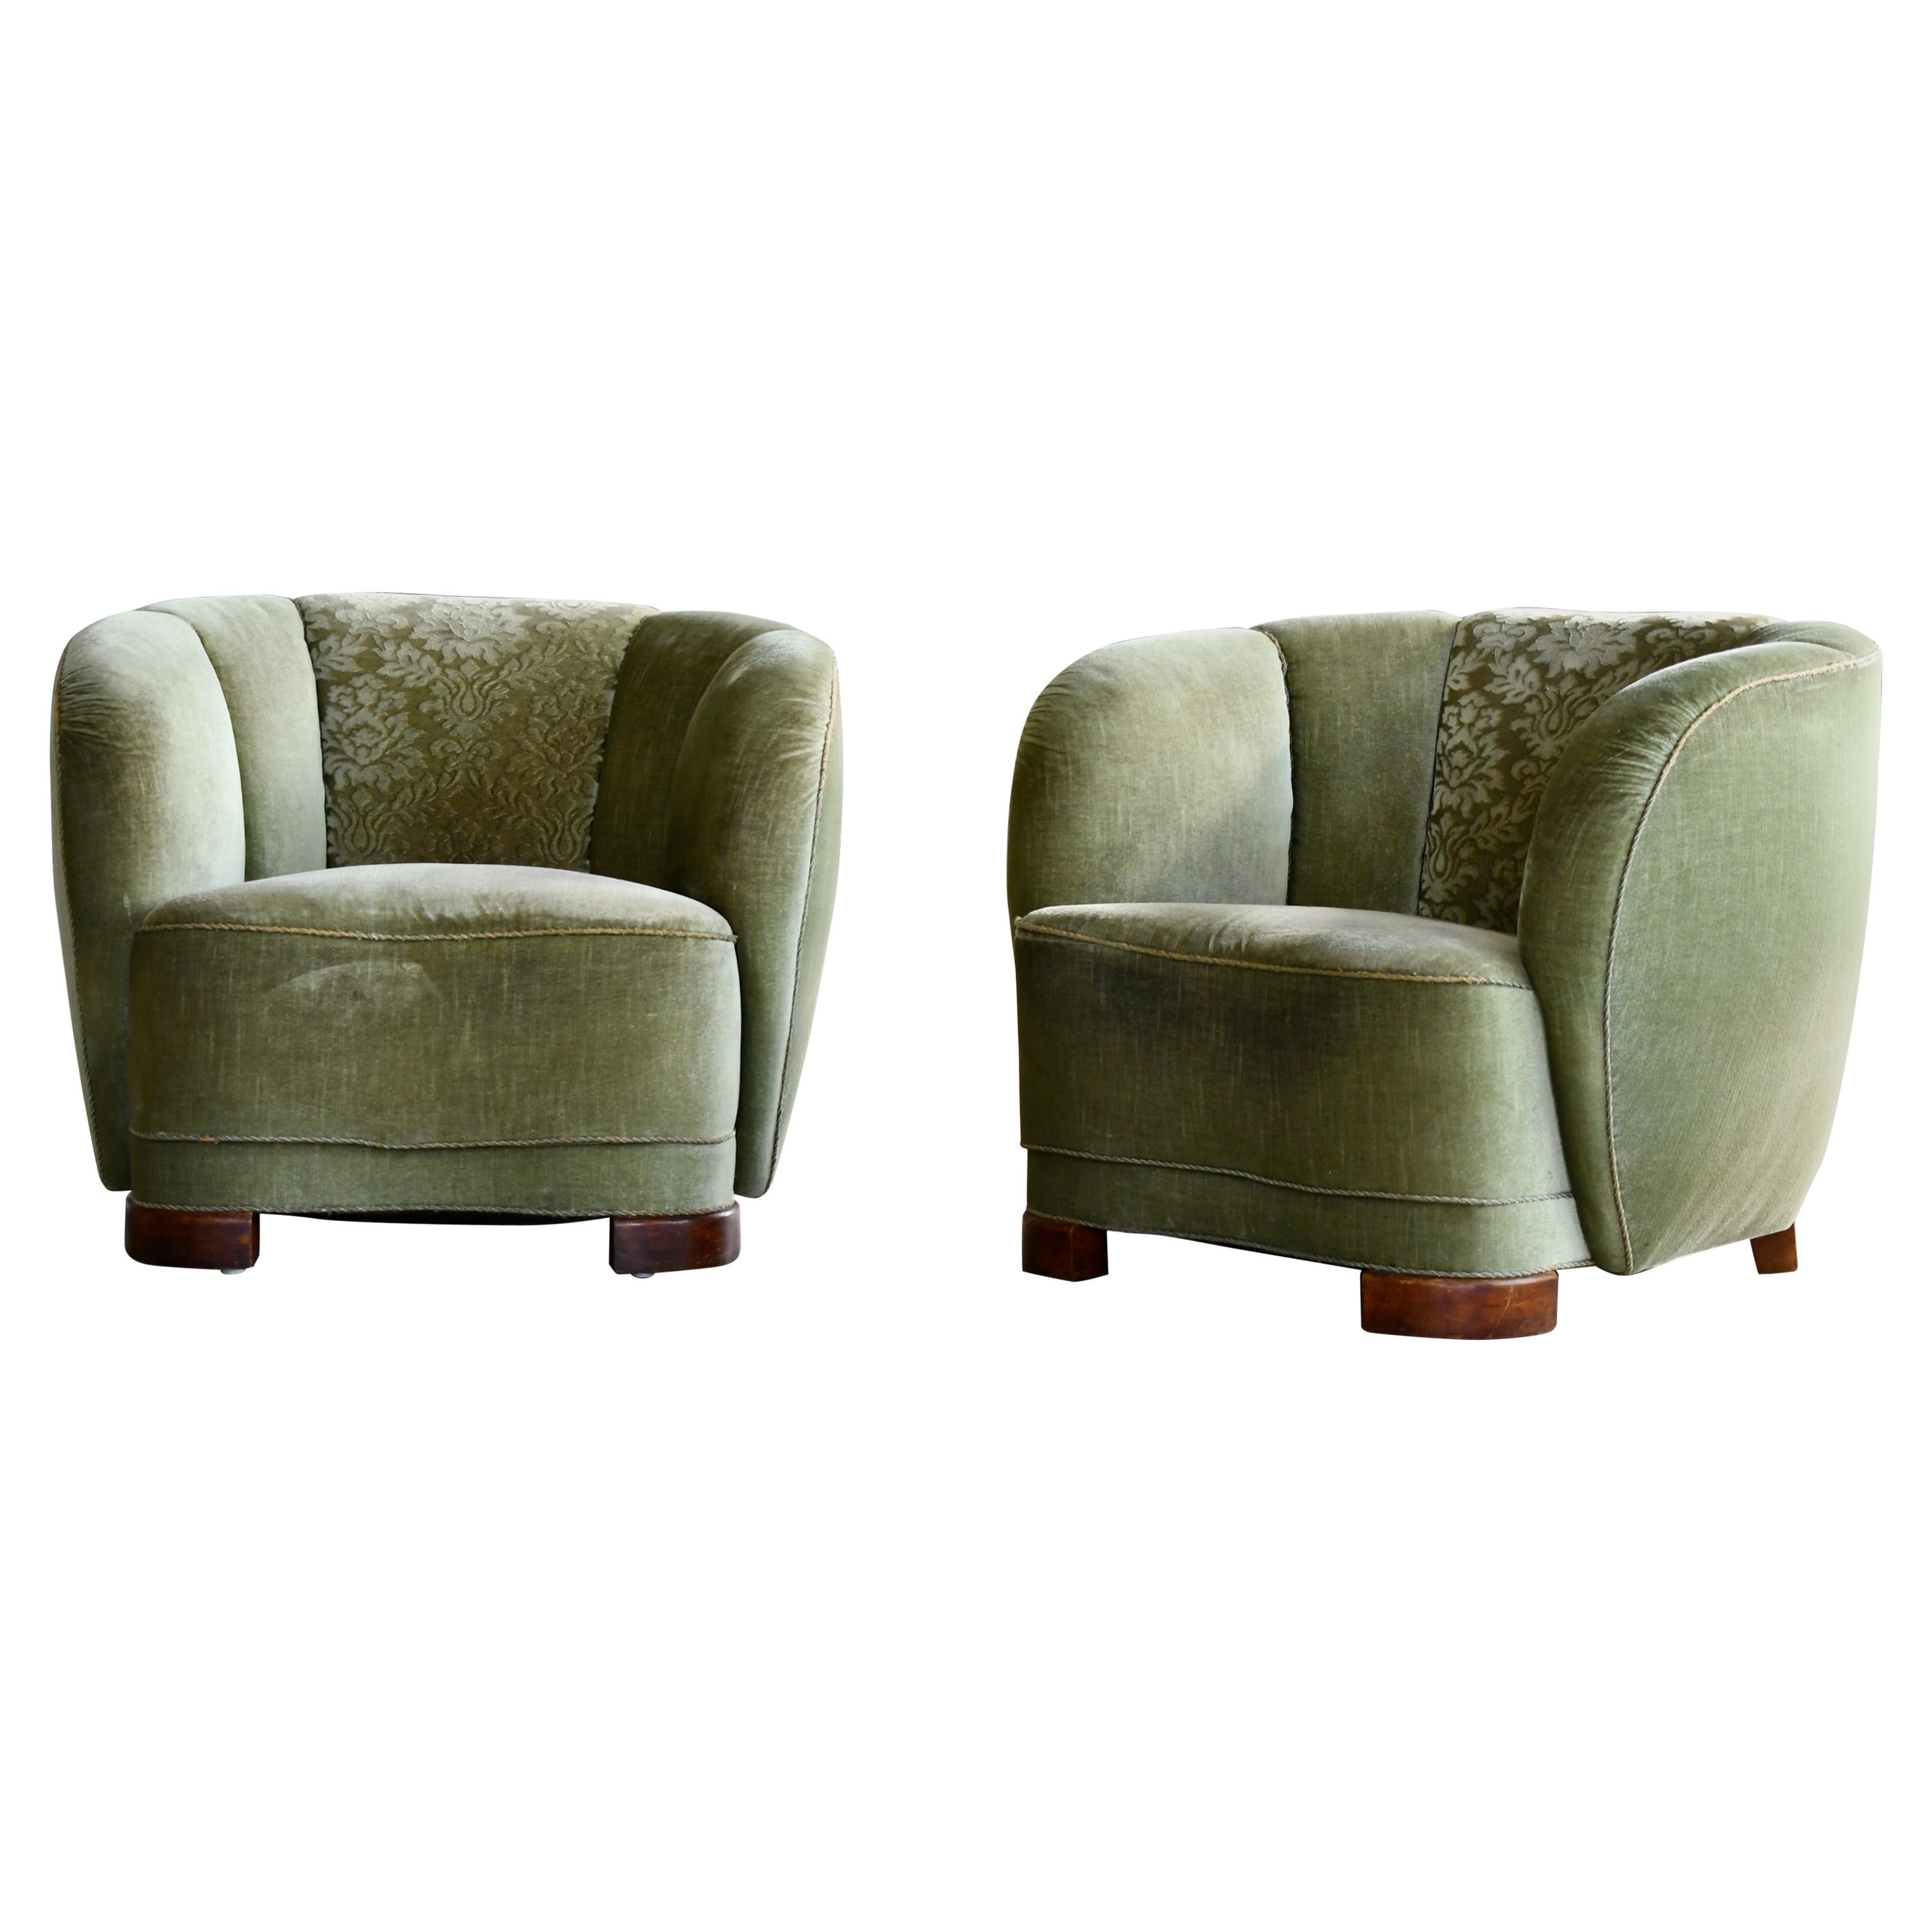 Danish 1940s Pair of Viggo Boesen Style Curved Lounge or Club Chairs